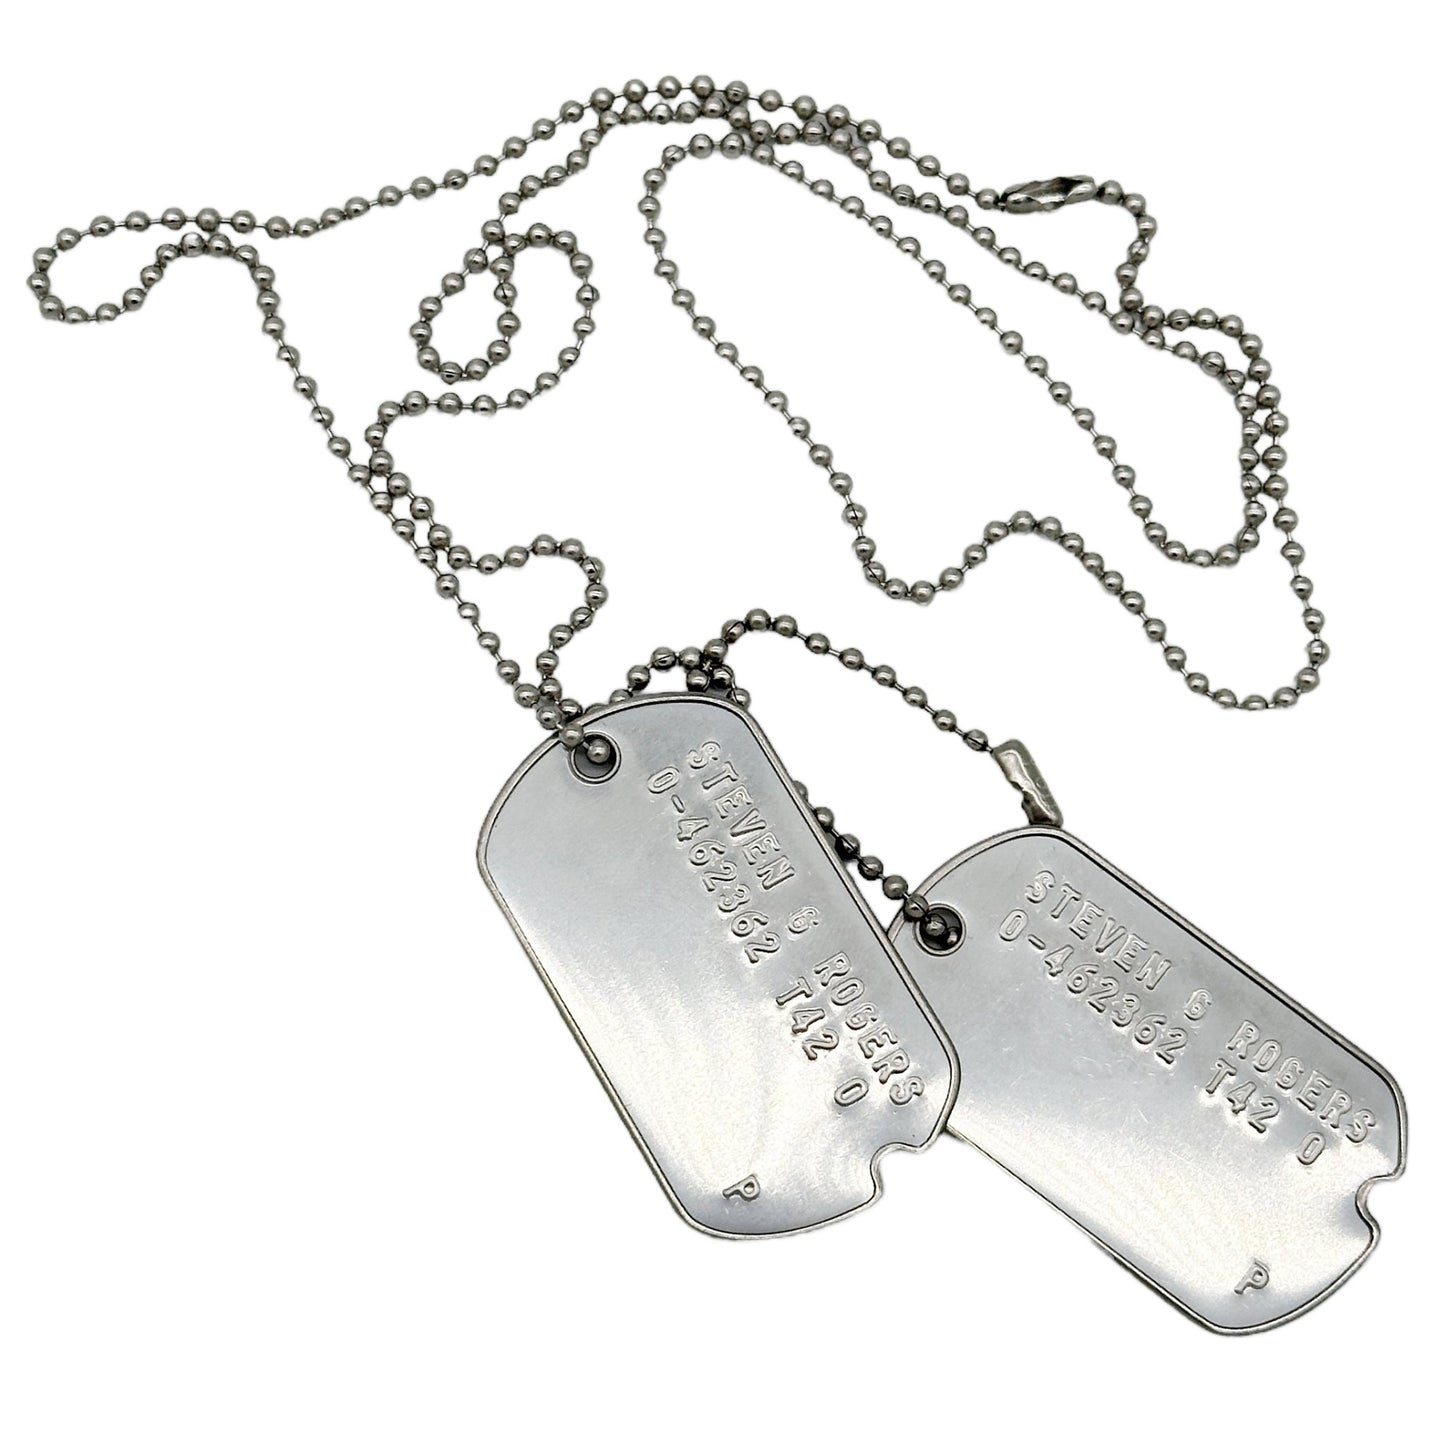 Steven Rogers 'Captain America' WWII Style Military Dog Tags Prop Replica - Notched pre 1965 WW2 - Stainless Steel - Chain Included - TheDogTagCo